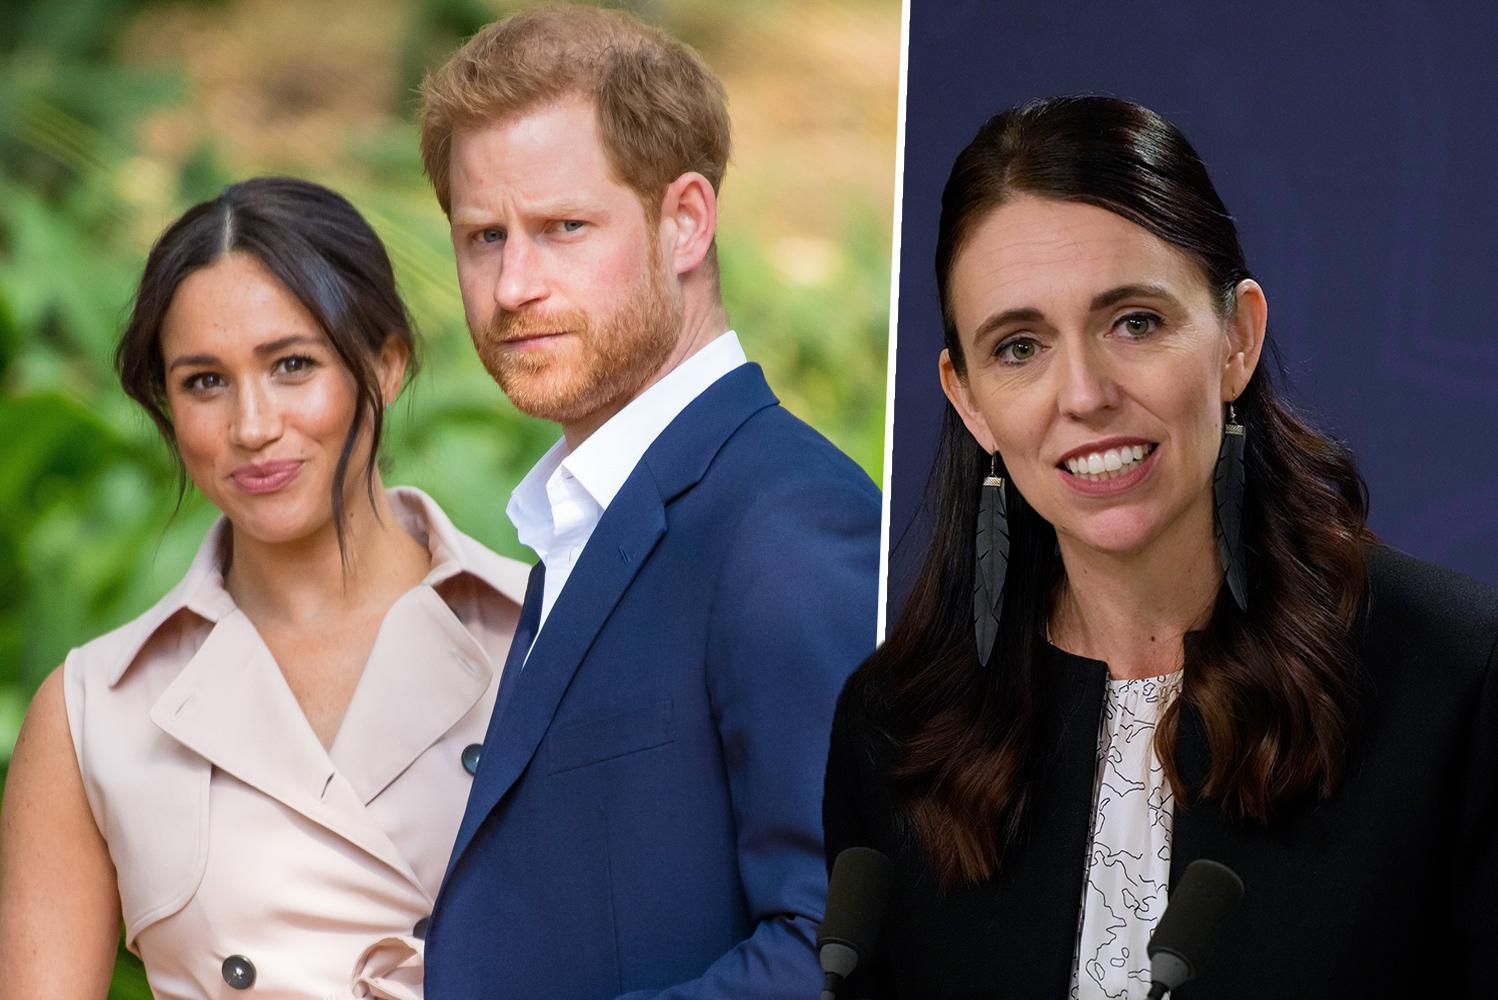 Prince Harry and Meghan’s new Netflix series will be released on December 31, the Prime Minister of New Zealand distances himself